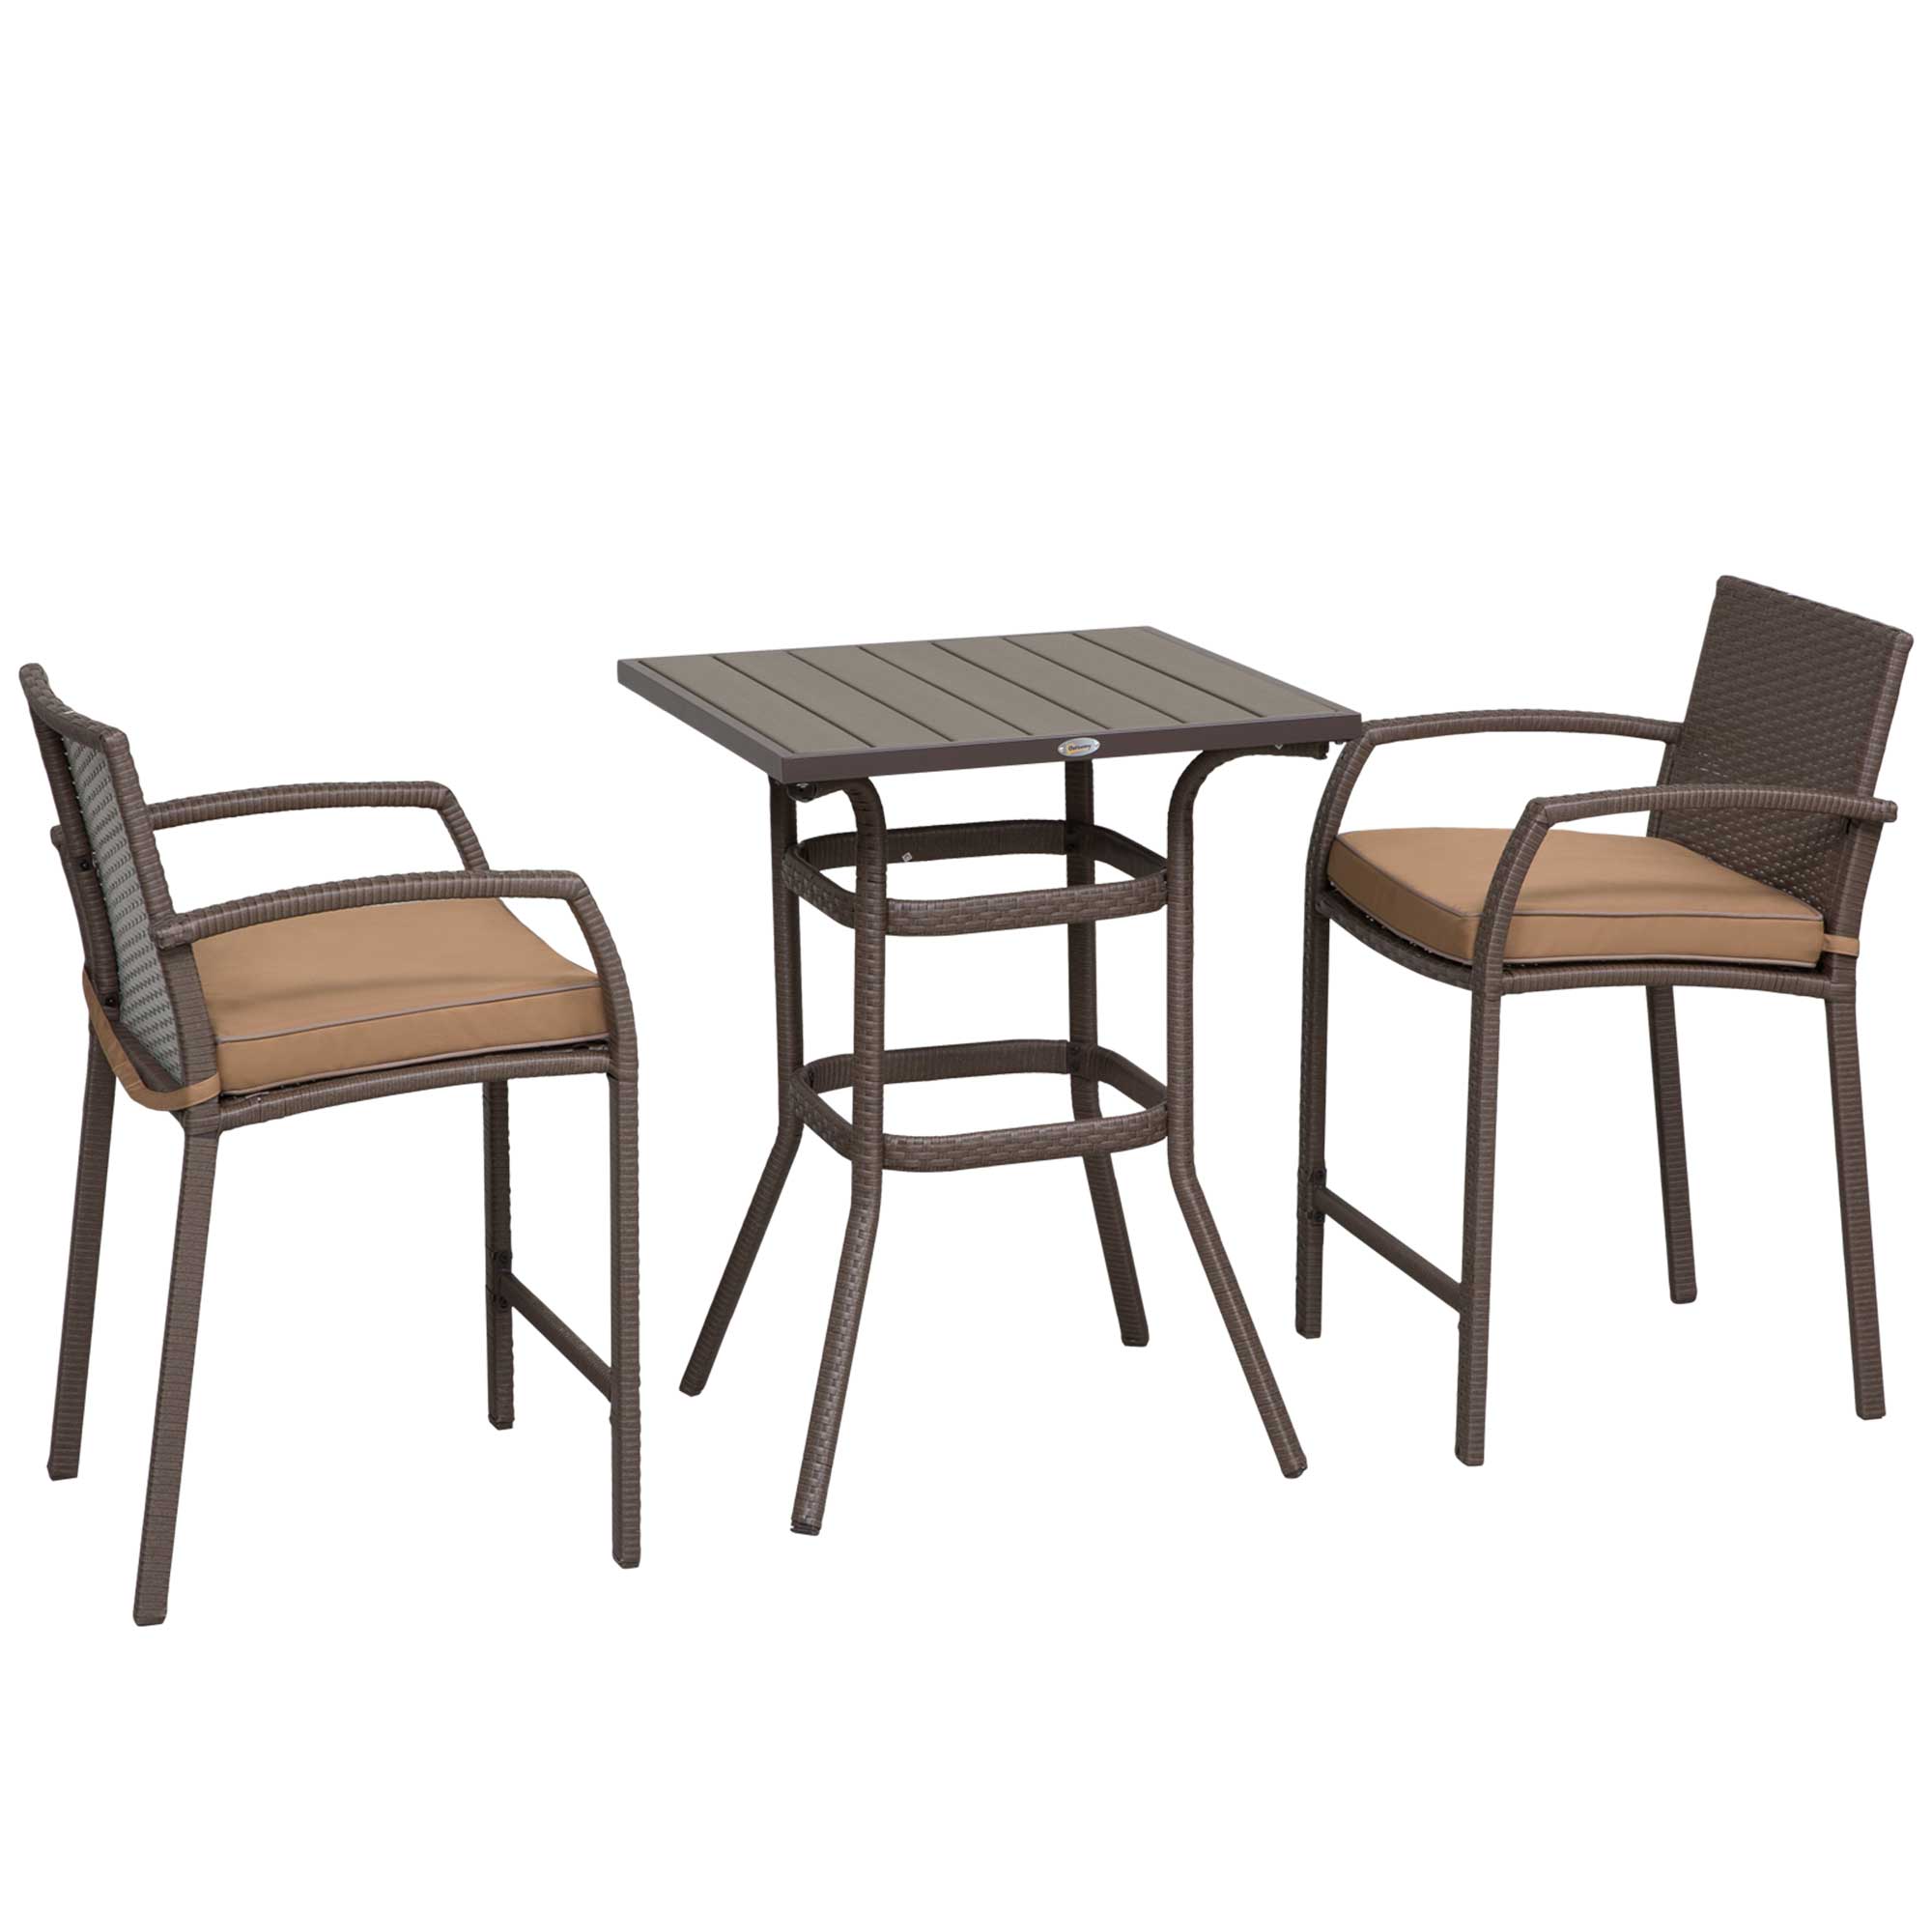 Outsunny 3 PCS Rattan Wicker Bar Set with Wood Grain Top Table and 2 Bar Stools for Outdoor, Patio, Poolside, Garden, Brown - image 1 of 9